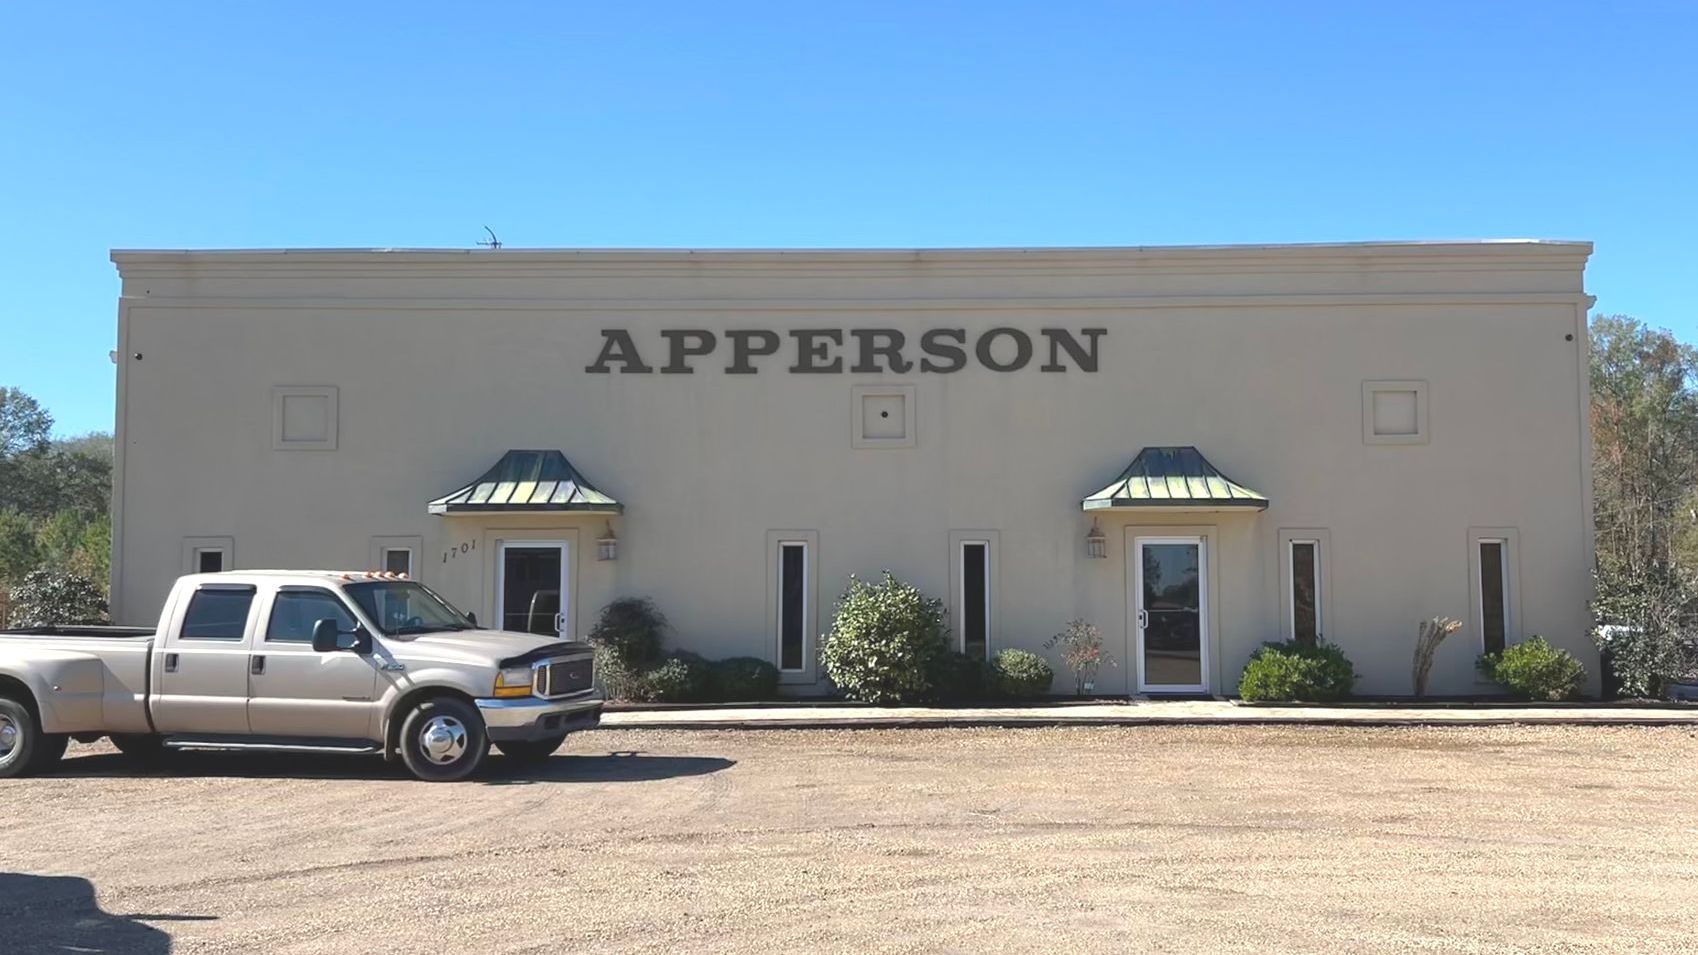 A truck is parked in front of a building that says apperson